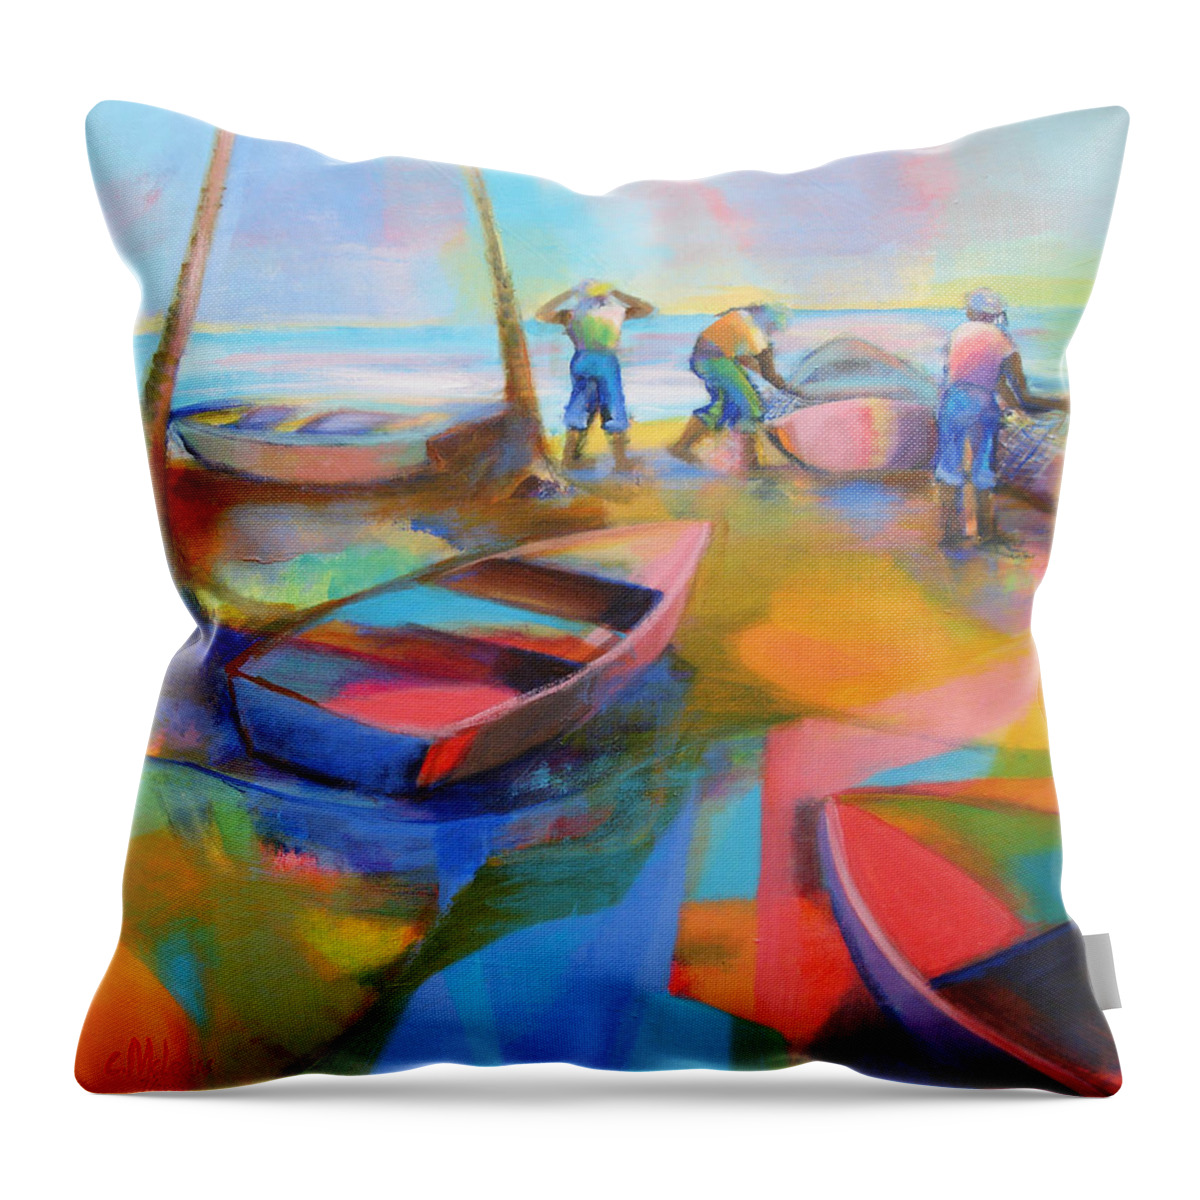 Abstract Throw Pillow featuring the painting Fishermen by Cynthia McLean